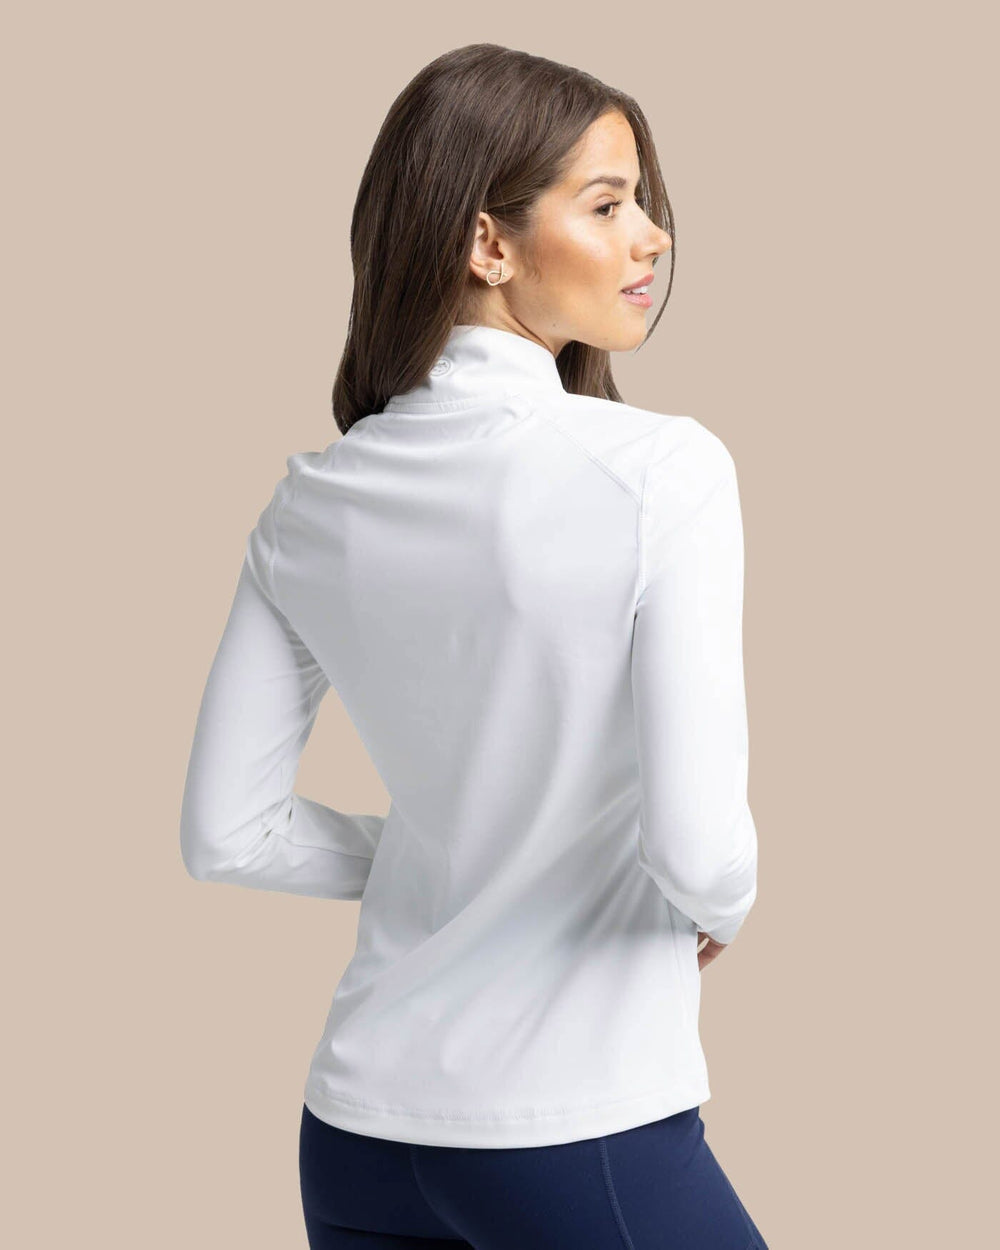 The back view of the Southern Tide Runaround Quarter Zip Pull Over by Southern Tide - Classic White